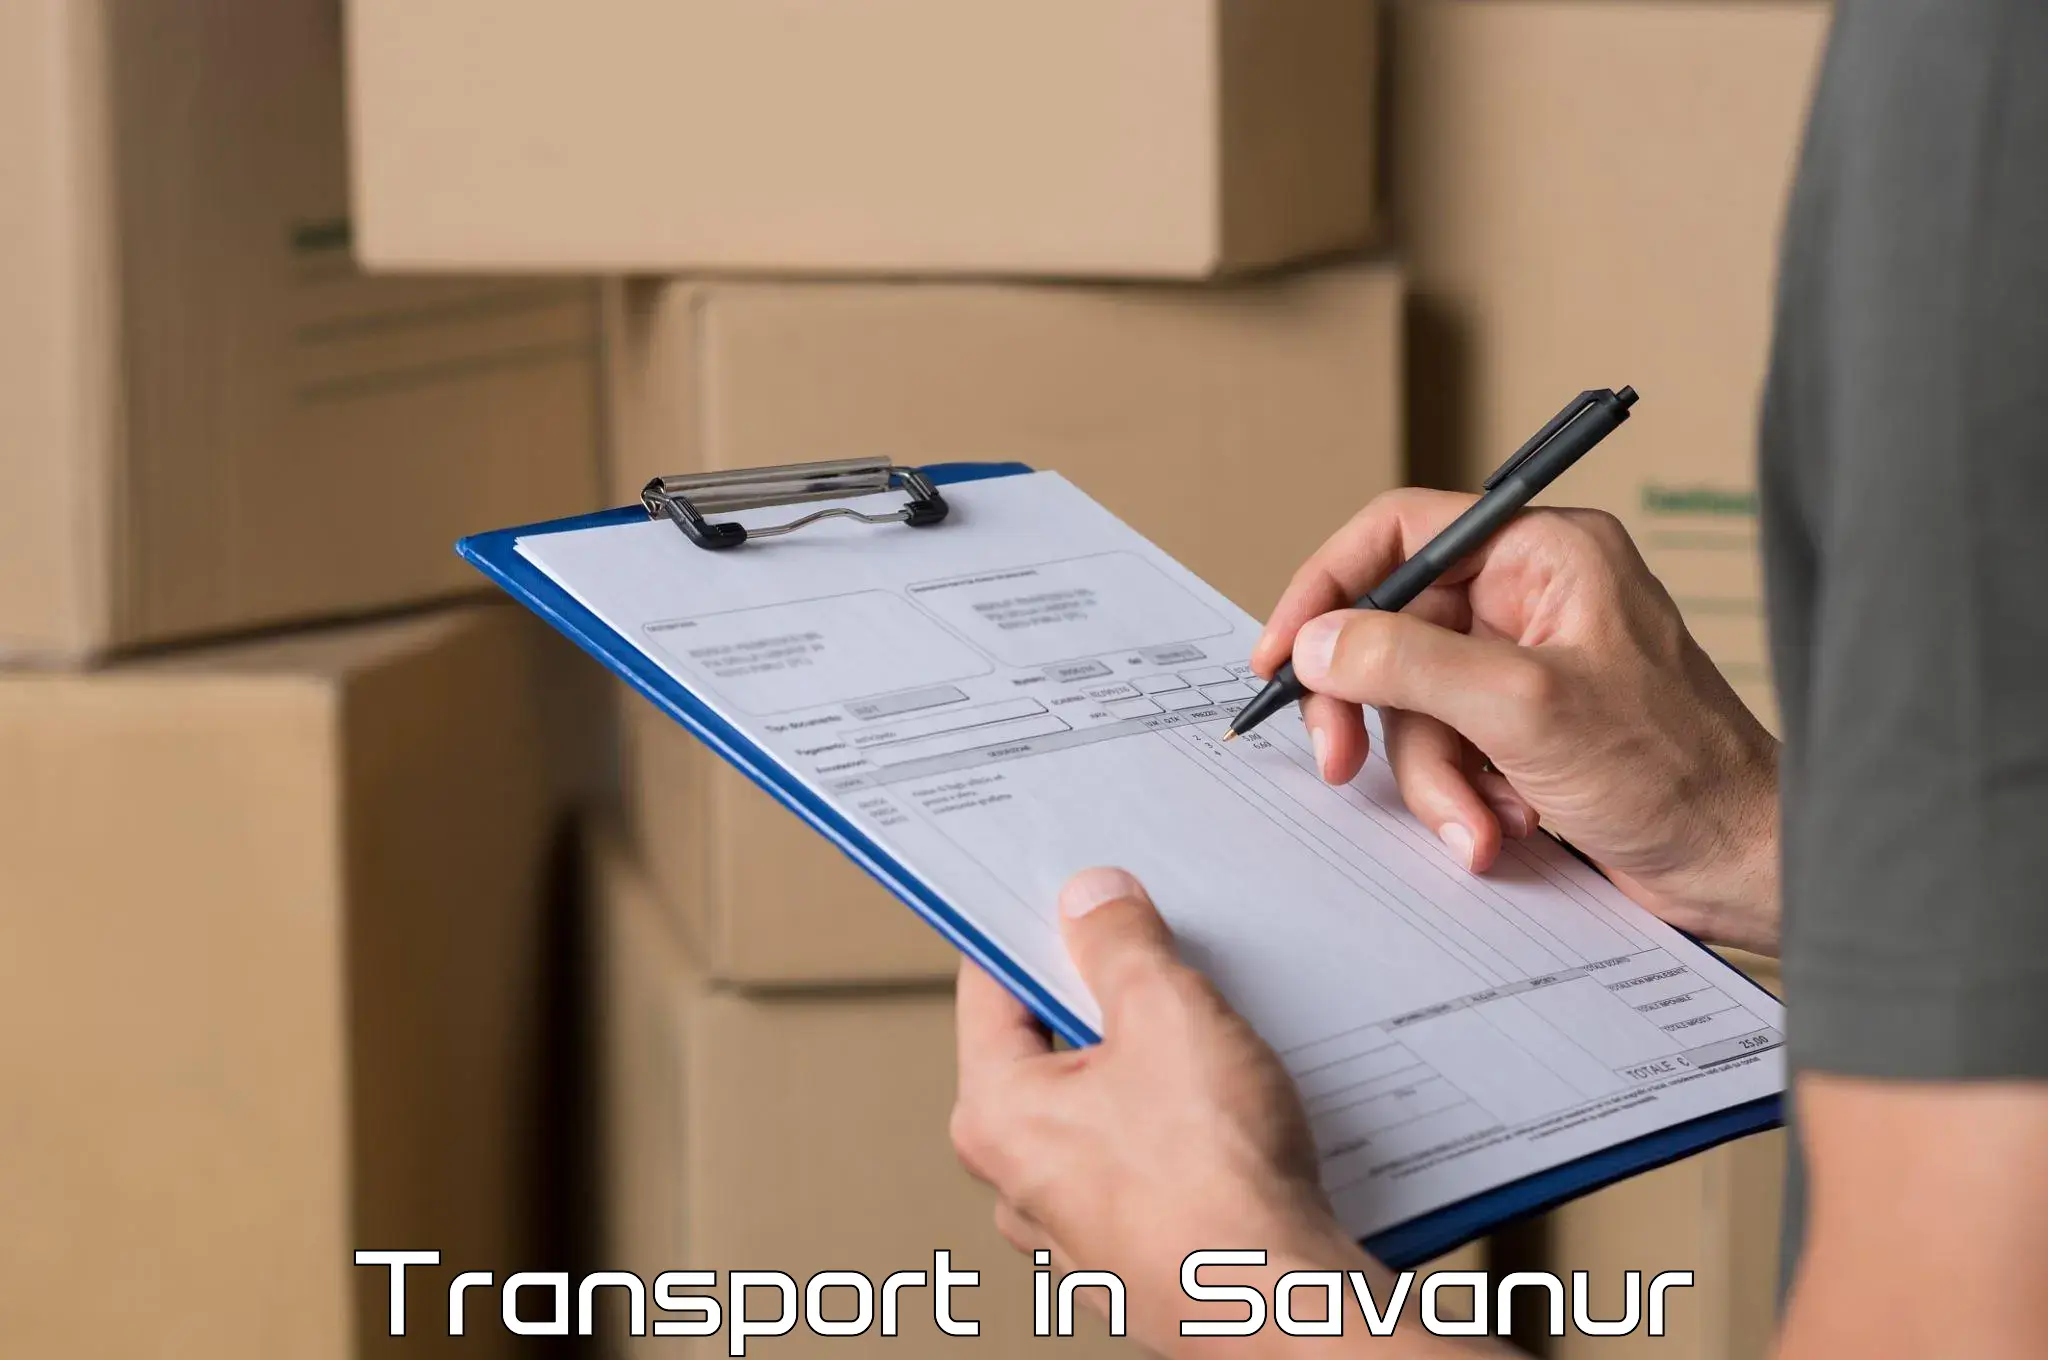 Transport bike from one state to another in Savanur